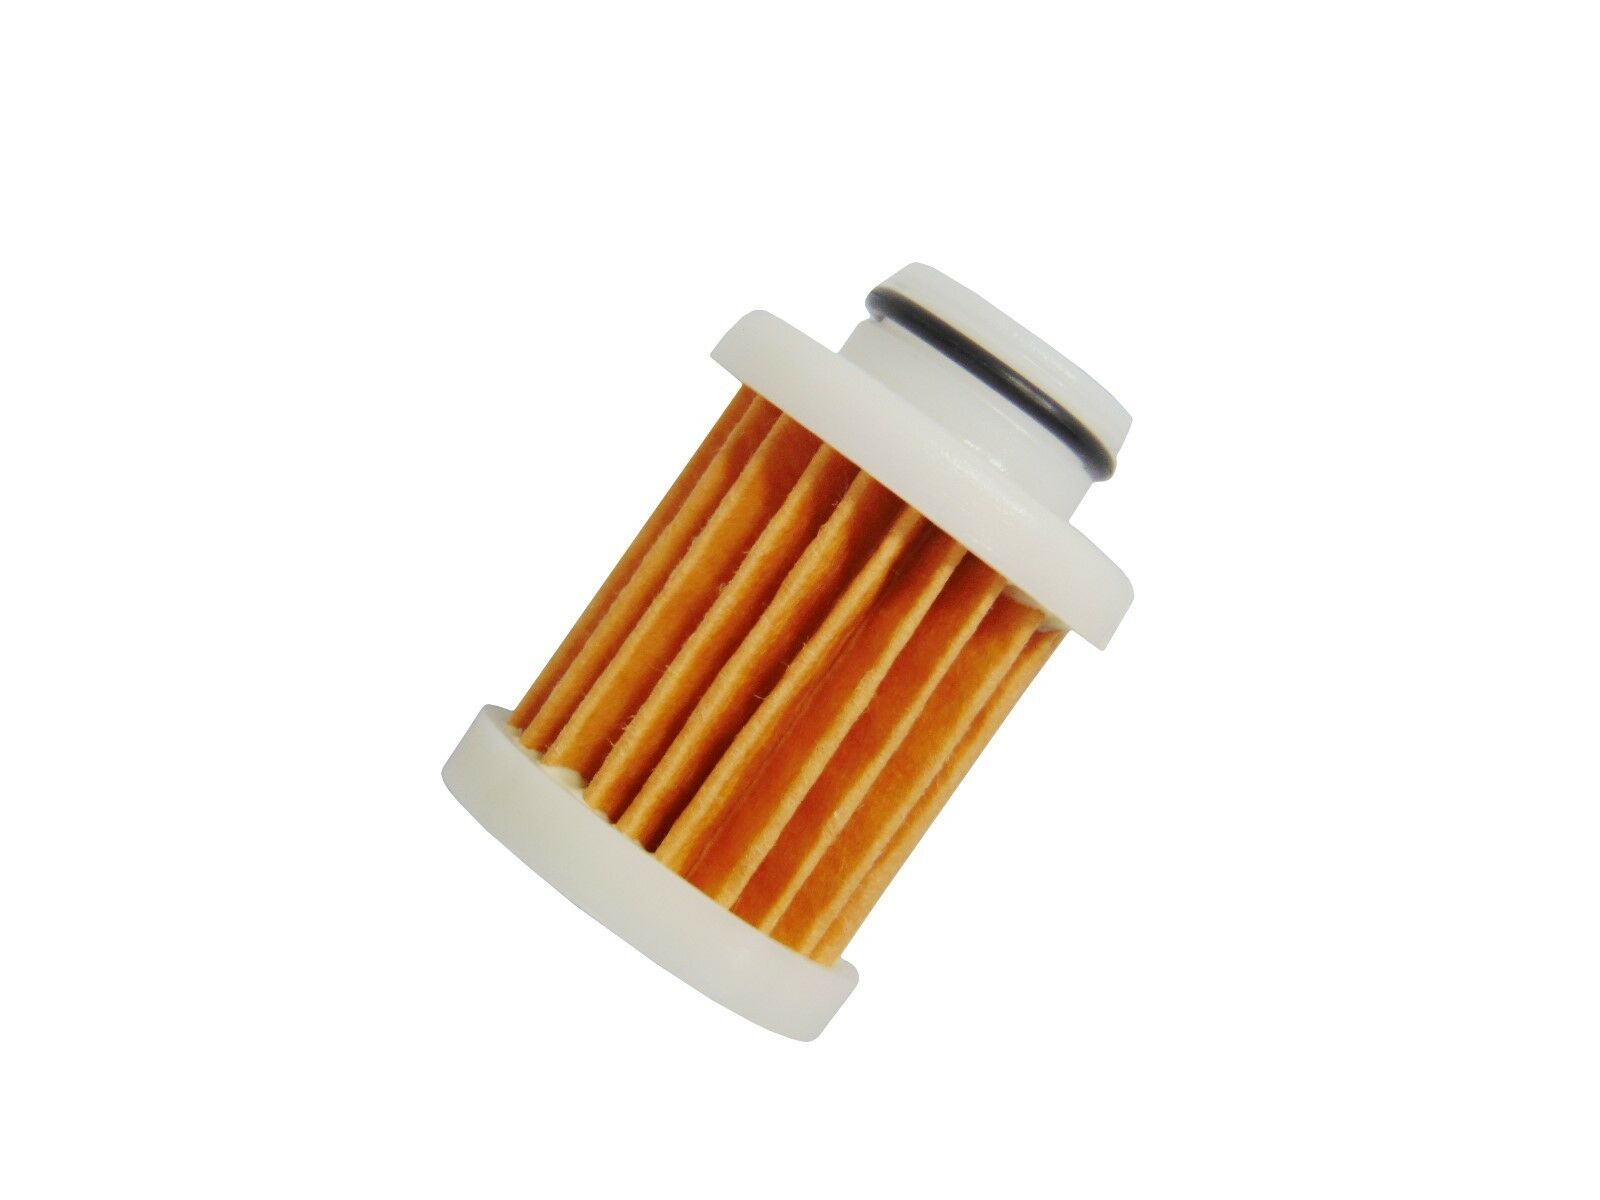 Boat Engines 6D8-WS24A-00 6D8-24563-00 Fuel Filter for Yamaha Outboard Engine 30HP-115HP, Sierra Marine 18-79799